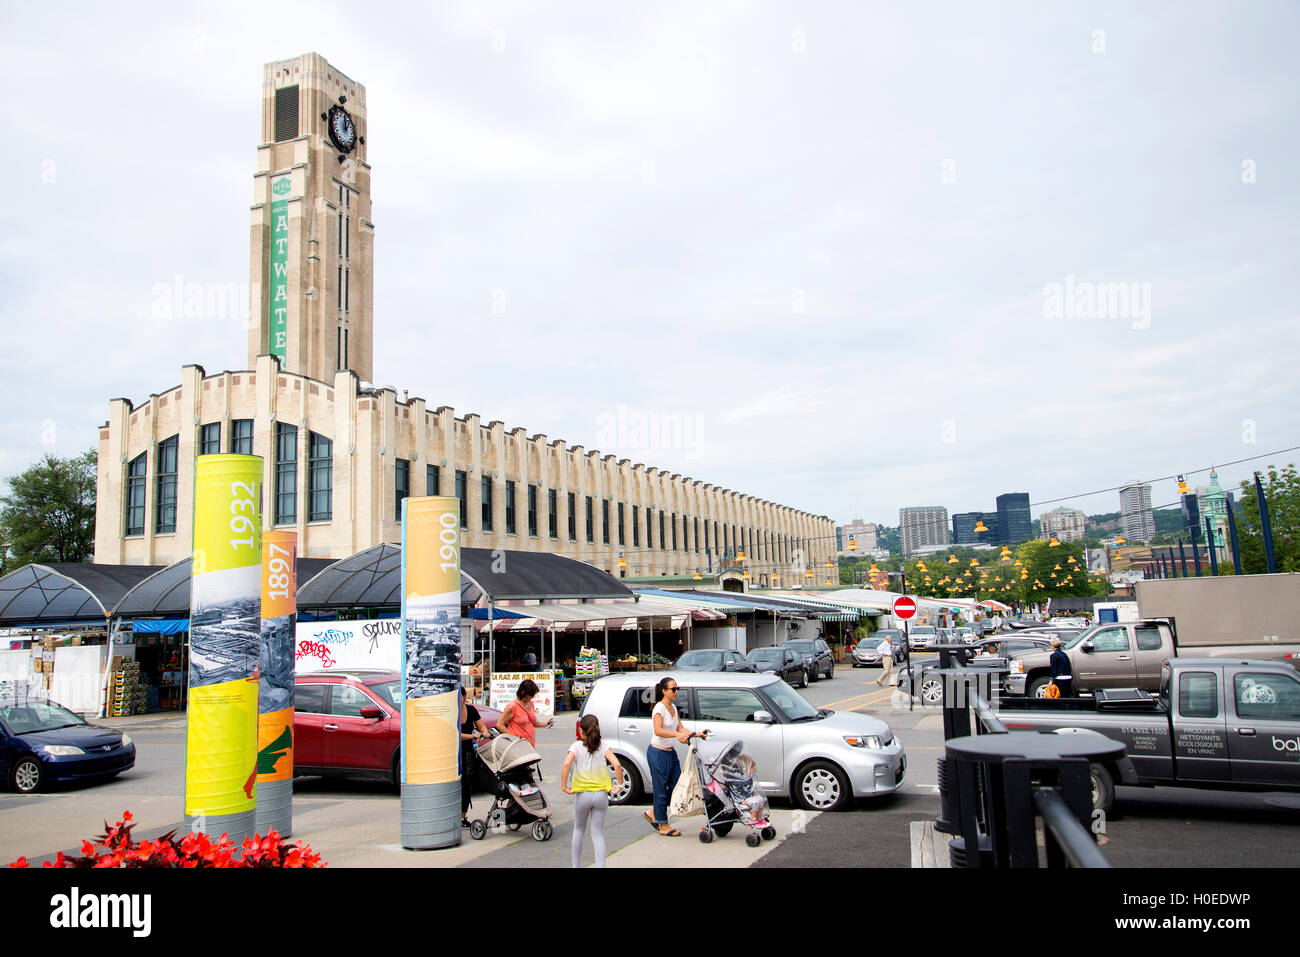 Atwater public Farmers Market Tower located near the Lachine Canal, Montreal. Stock Photo